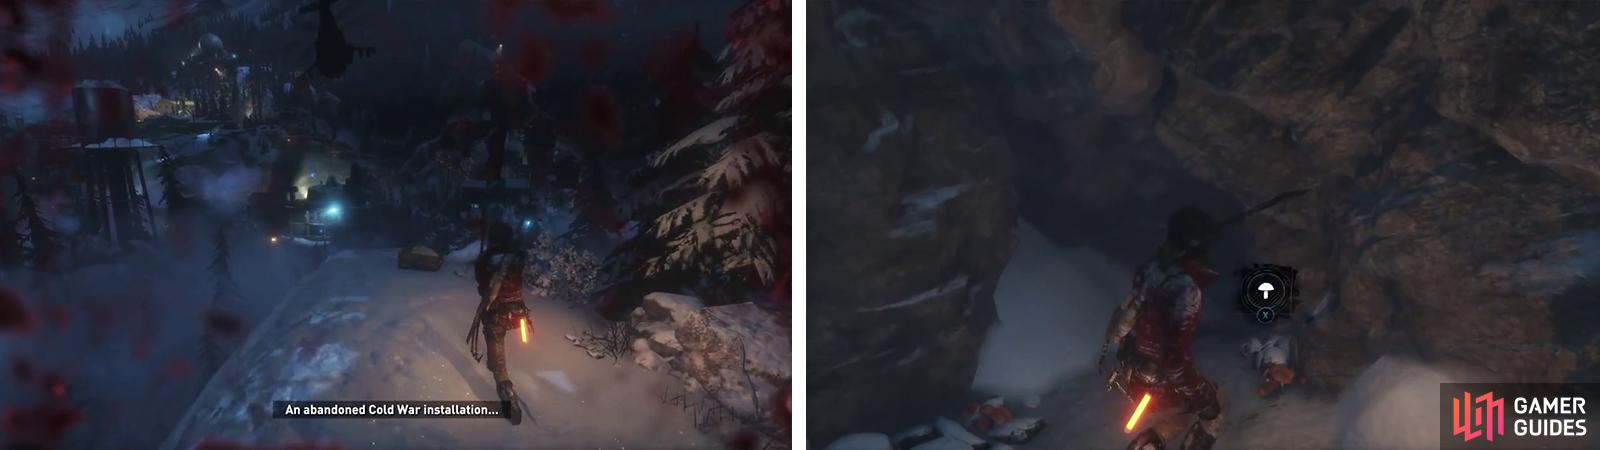 When you regain control, follow the objective marker to open the chest here (left). Find and loot the Mushrooms (right).